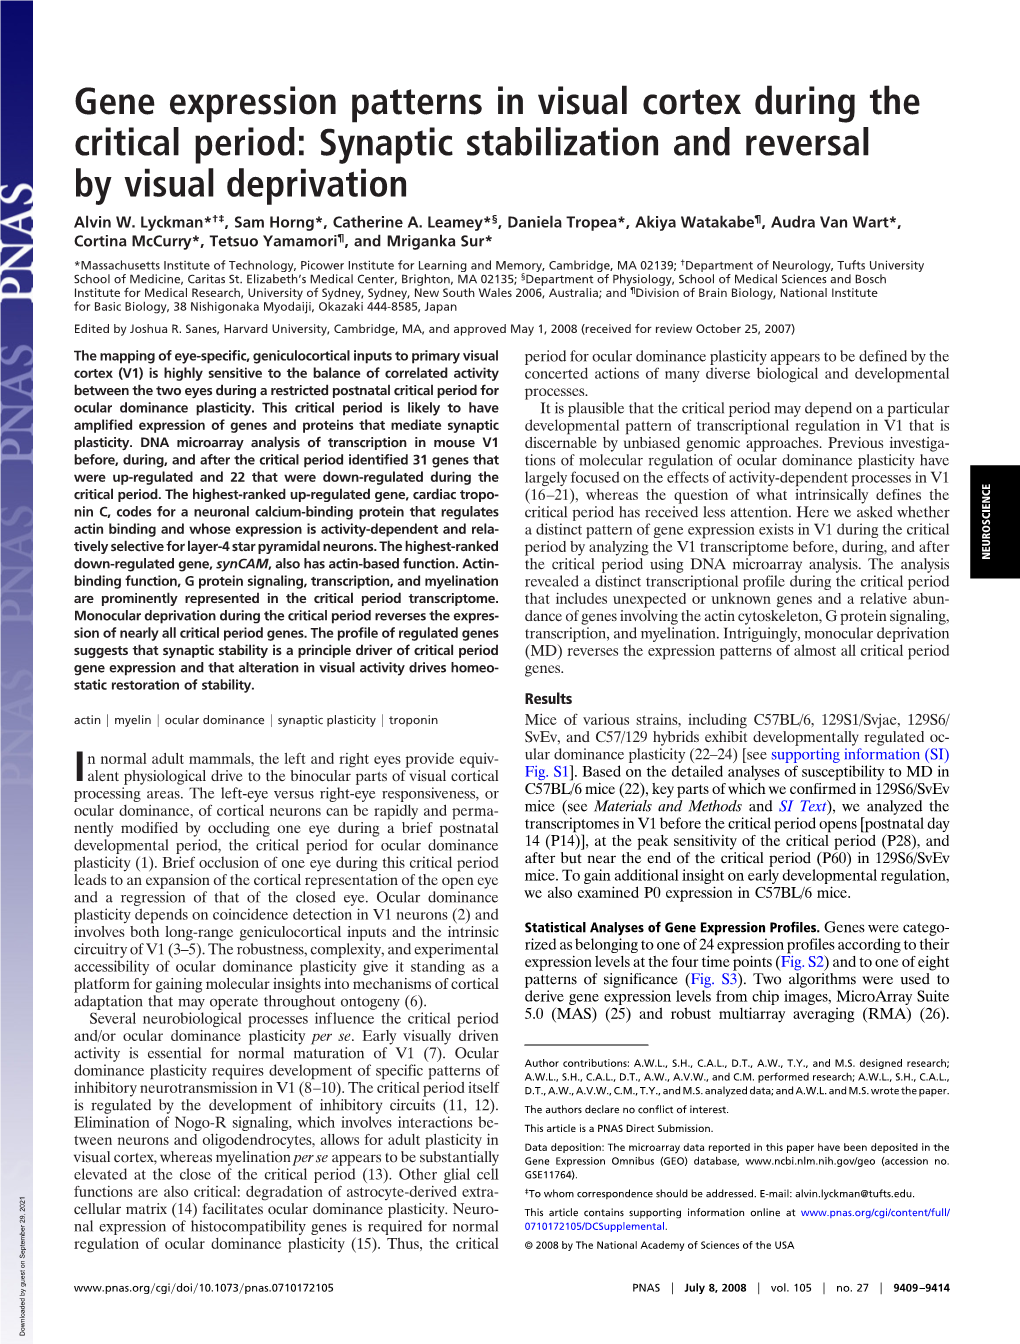 Gene Expression Patterns in Visual Cortex During the Critical Period: Synaptic Stabilization and Reversal by Visual Deprivation Alvin W